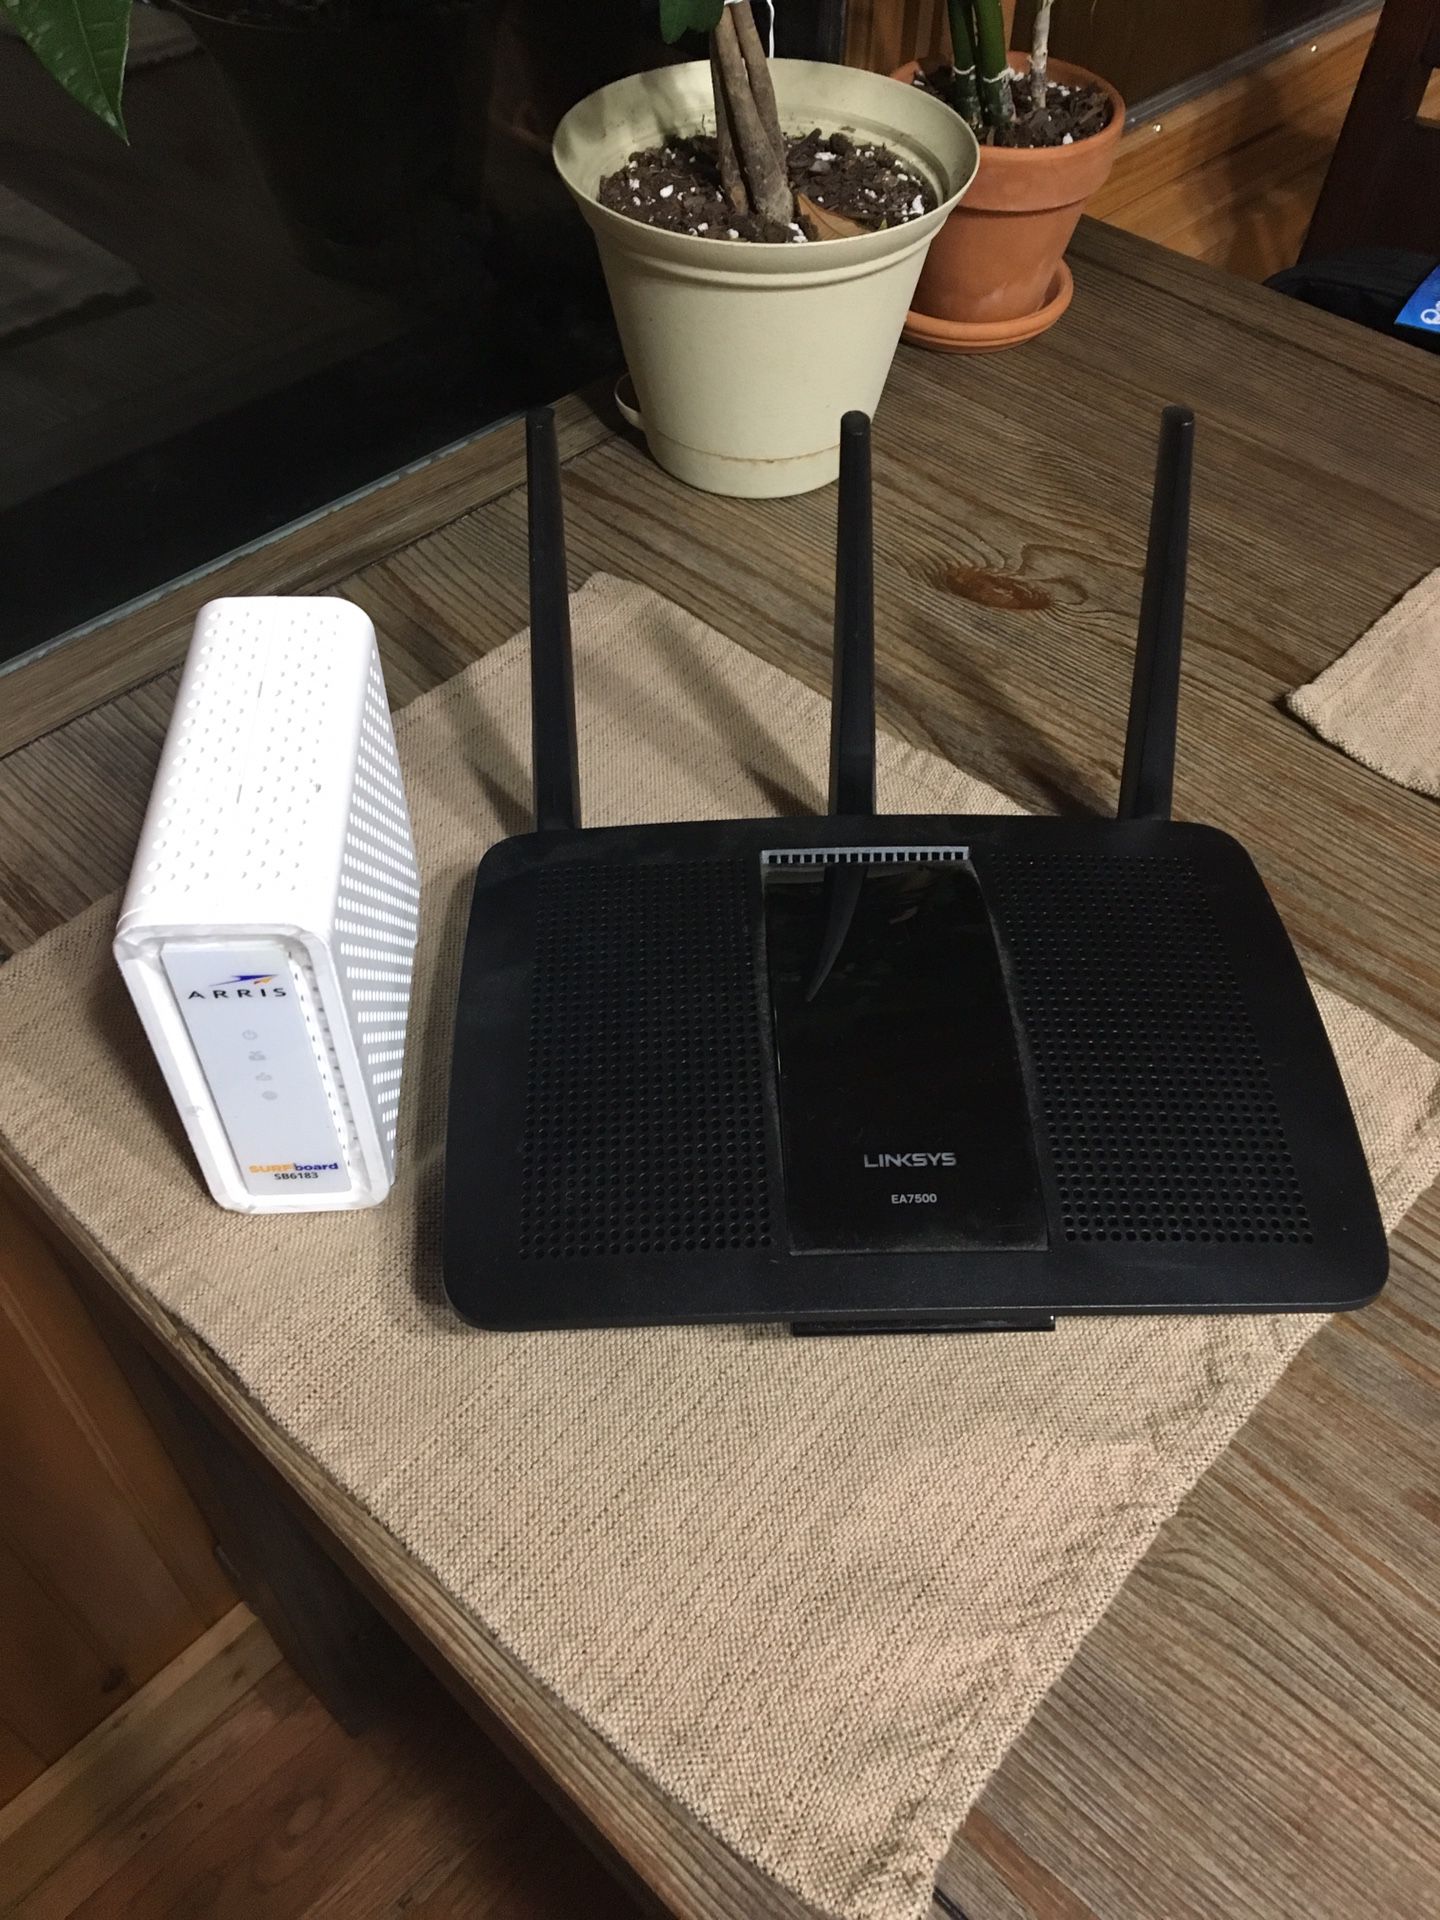 Modem and Wireless Router for in home Wi-fi